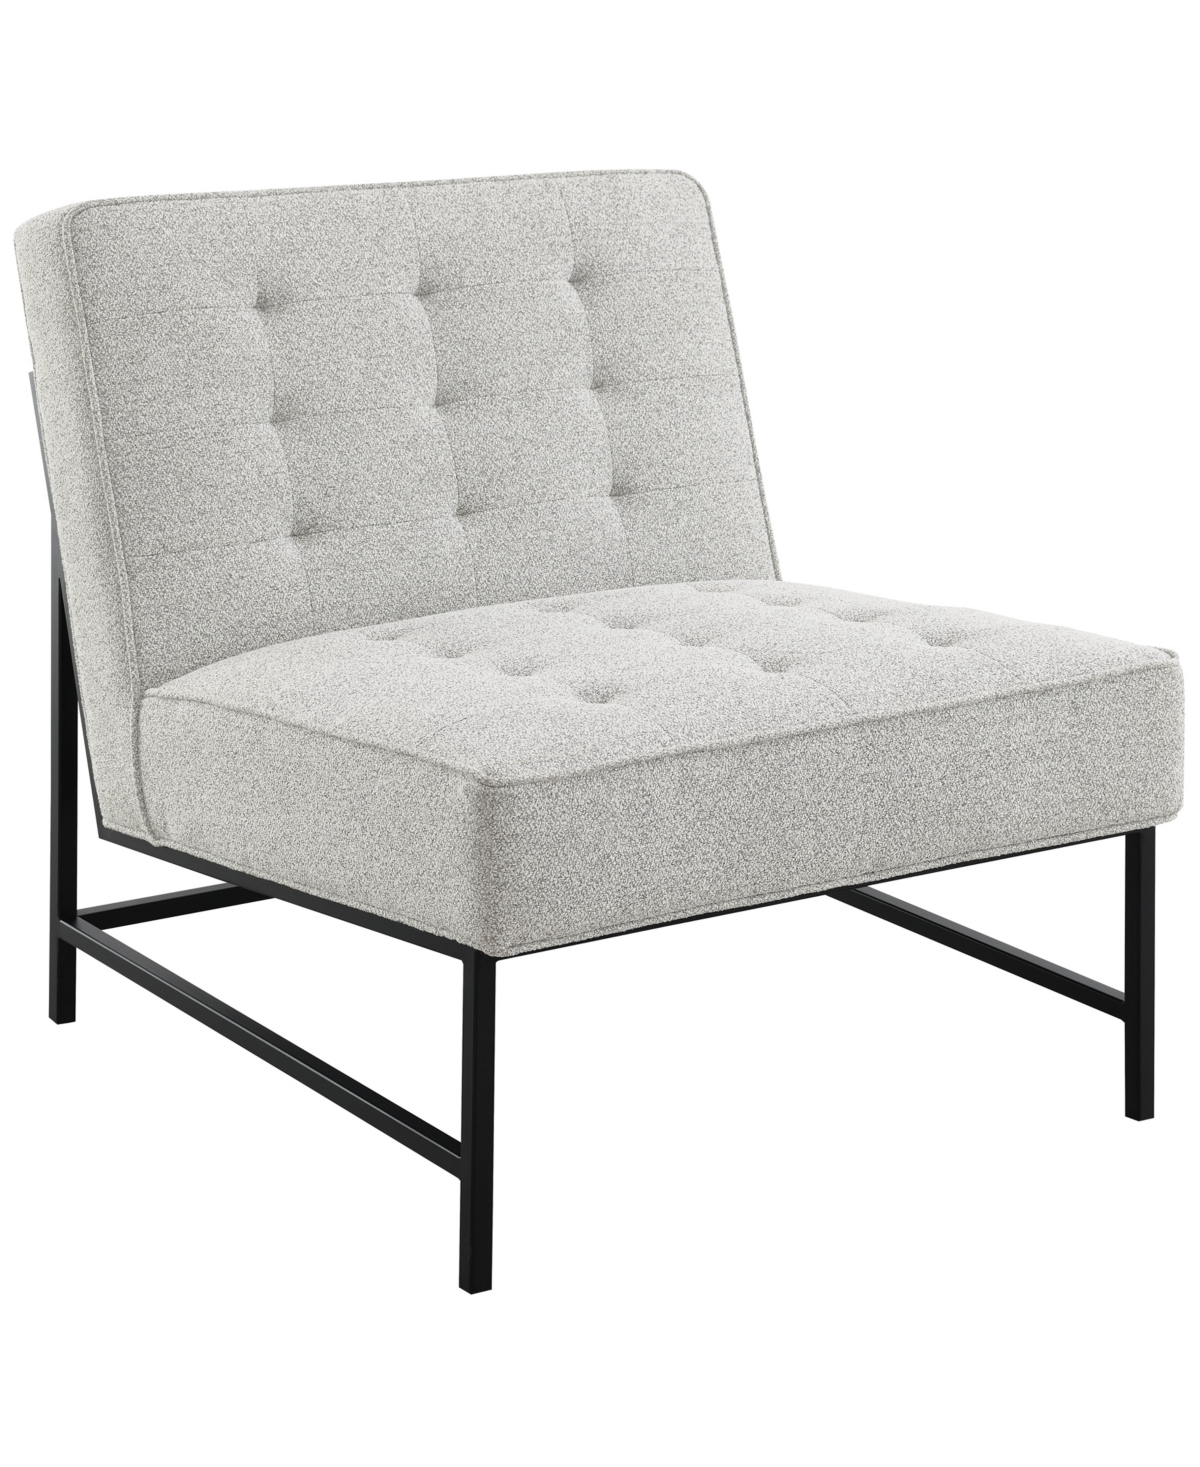 Abbyson Living Astor 32.5 Tufted Fabric Chair In Ivory